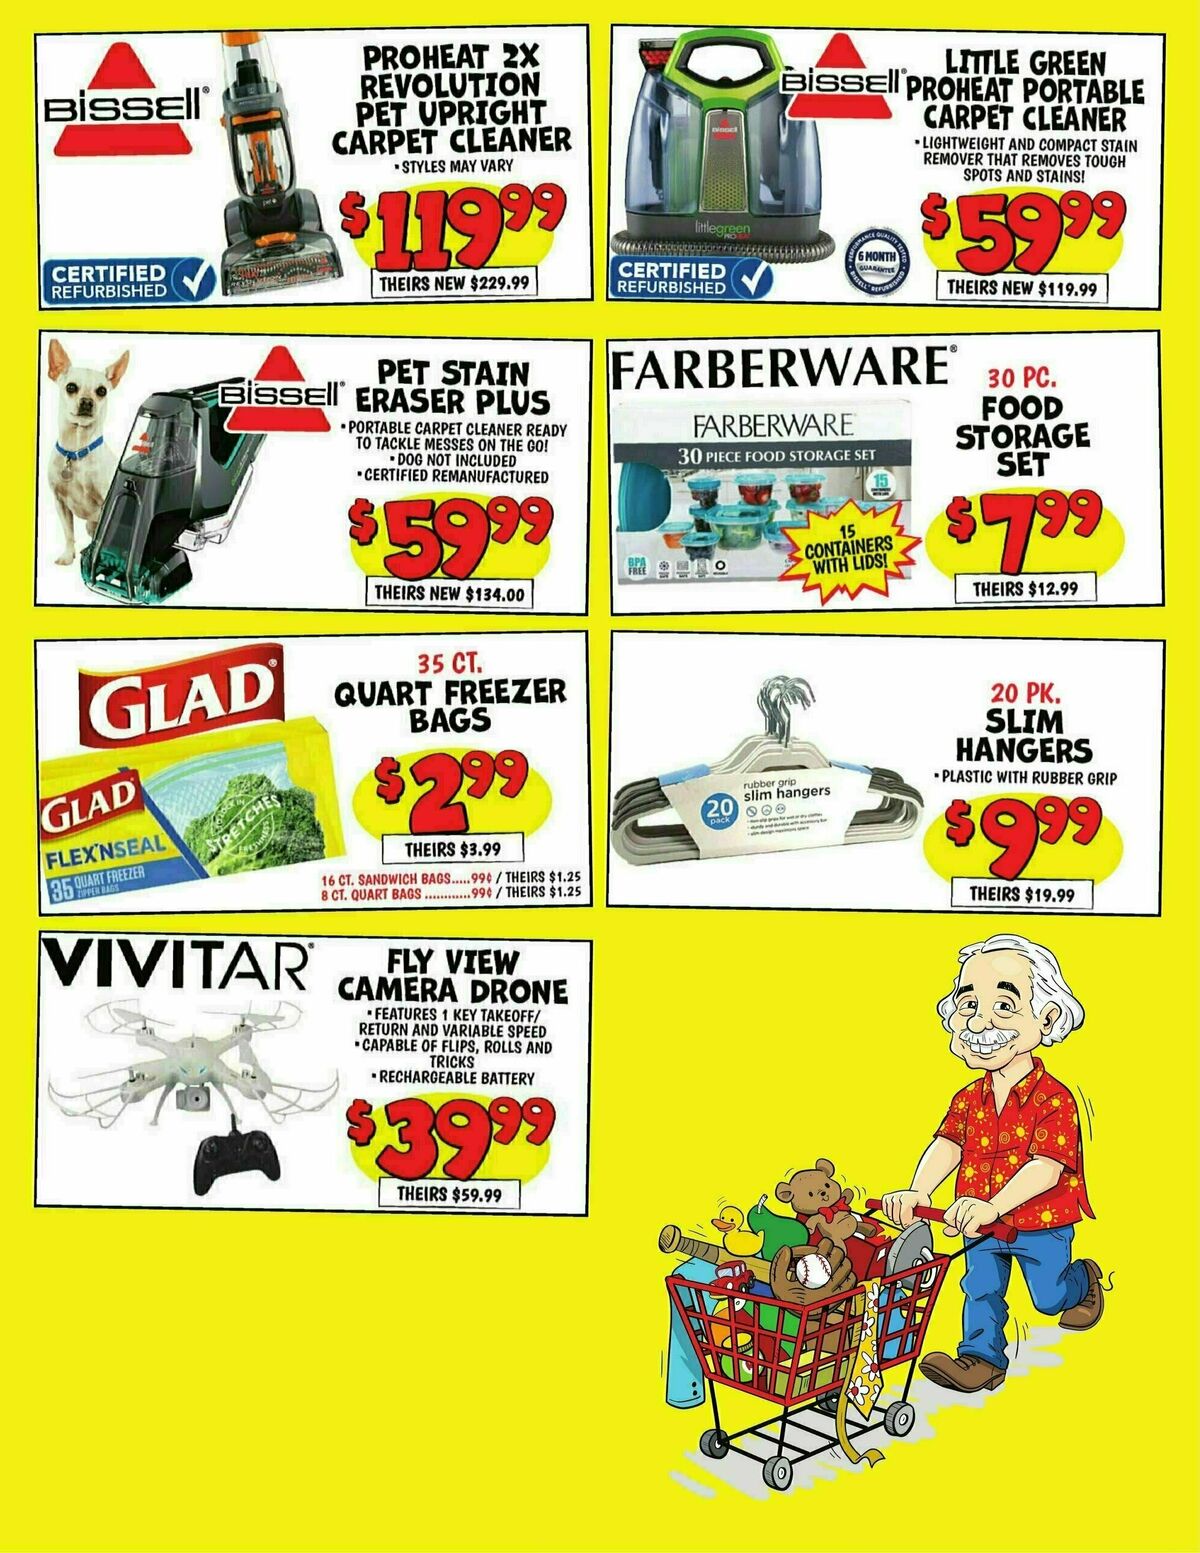 Ollie's Bargain Outlet Weekly Ad from October 9